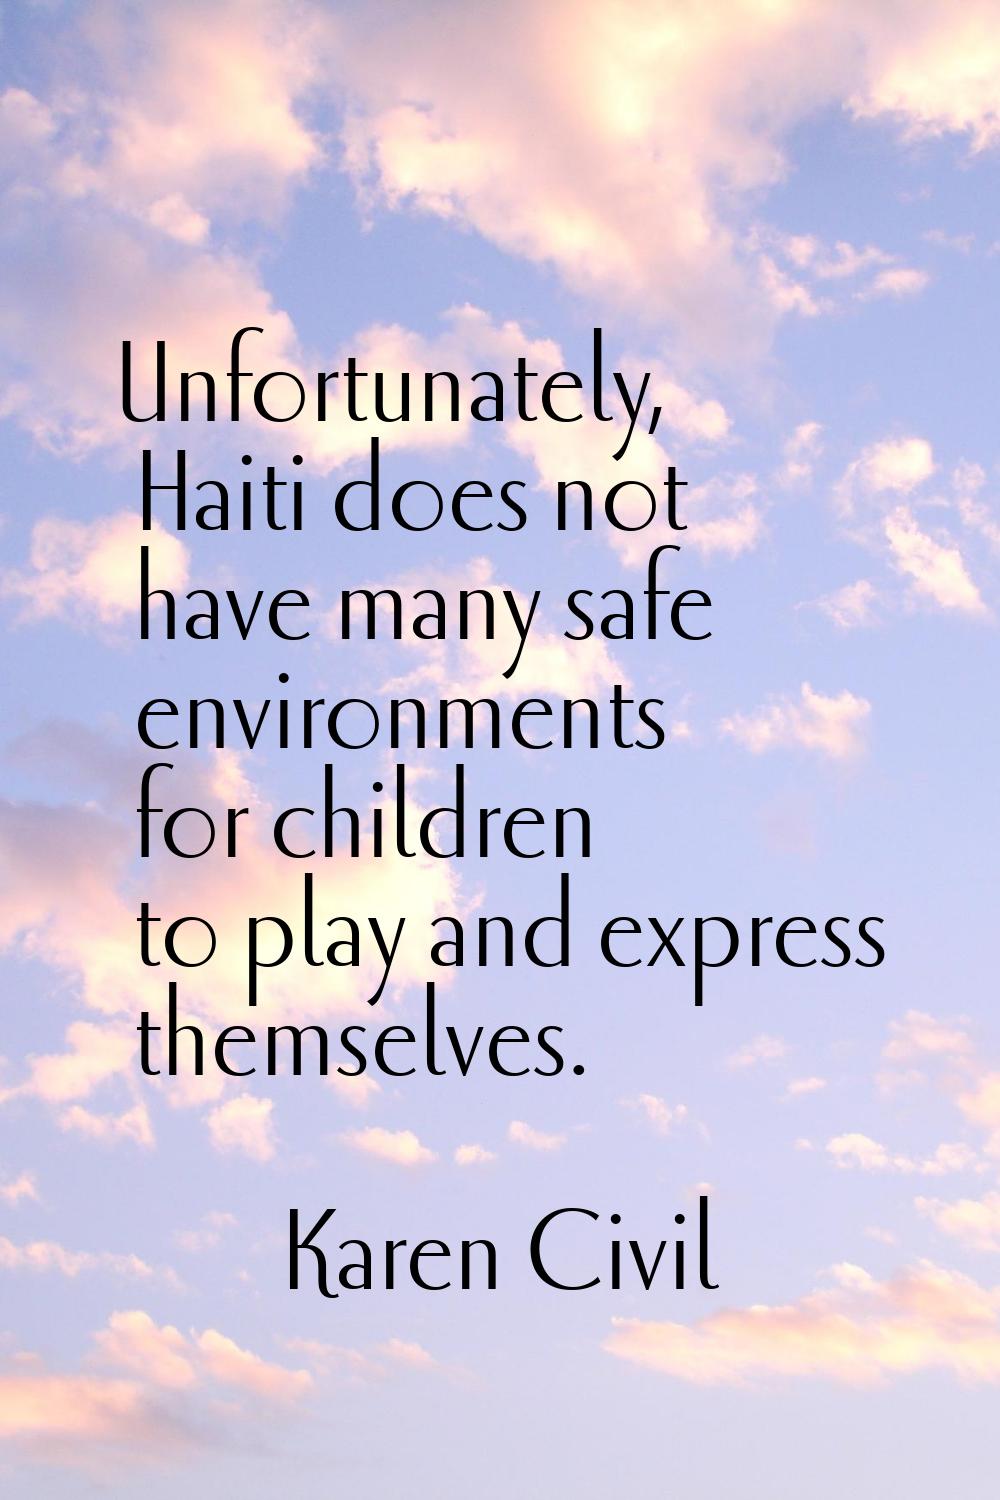 Unfortunately, Haiti does not have many safe environments for children to play and express themselv